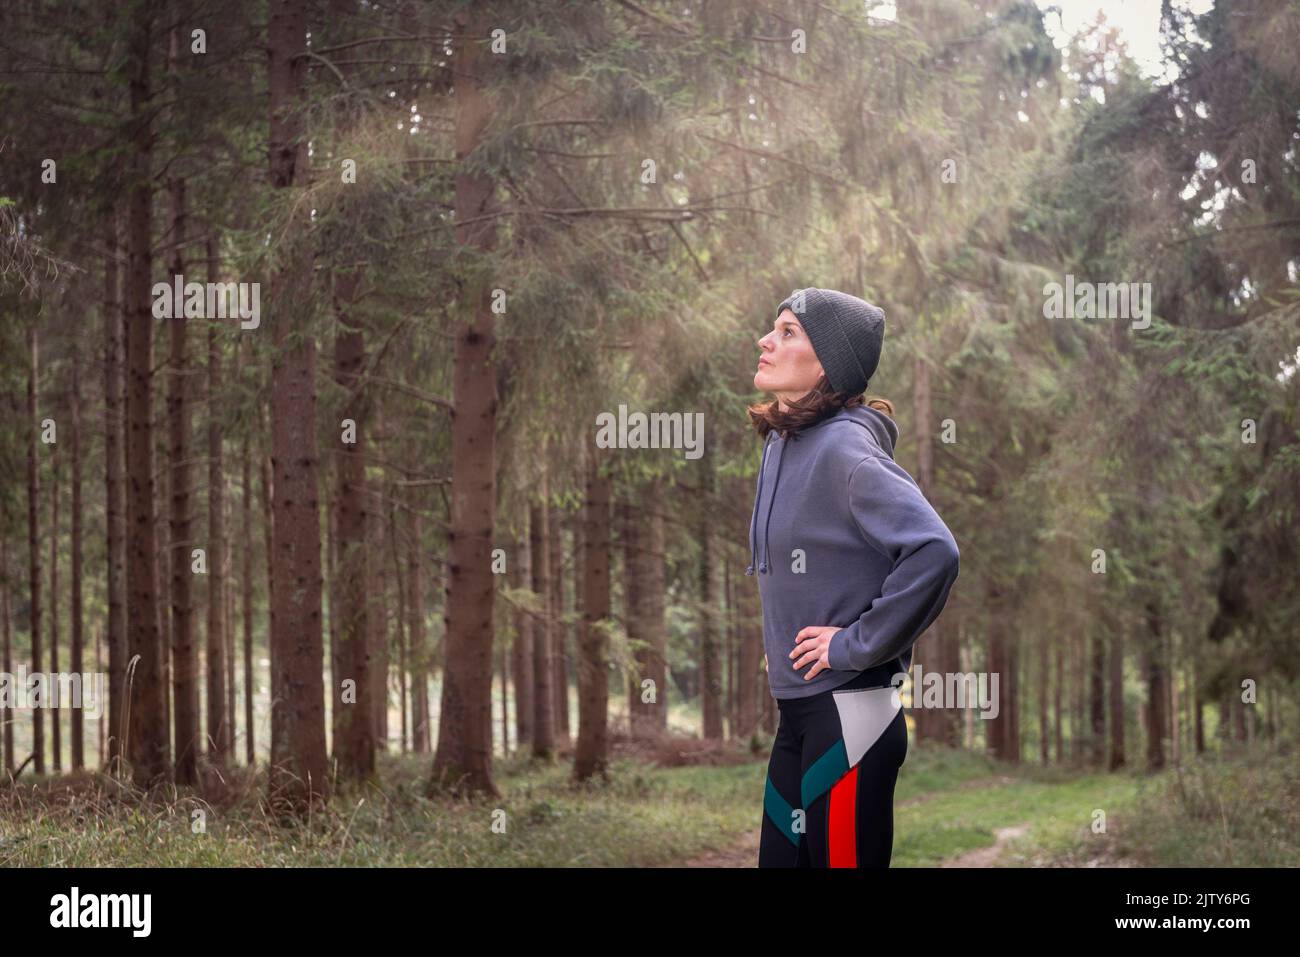 Portrait of female runner with hands on hips in a forest, resting after a run or exercise. Stock Photo